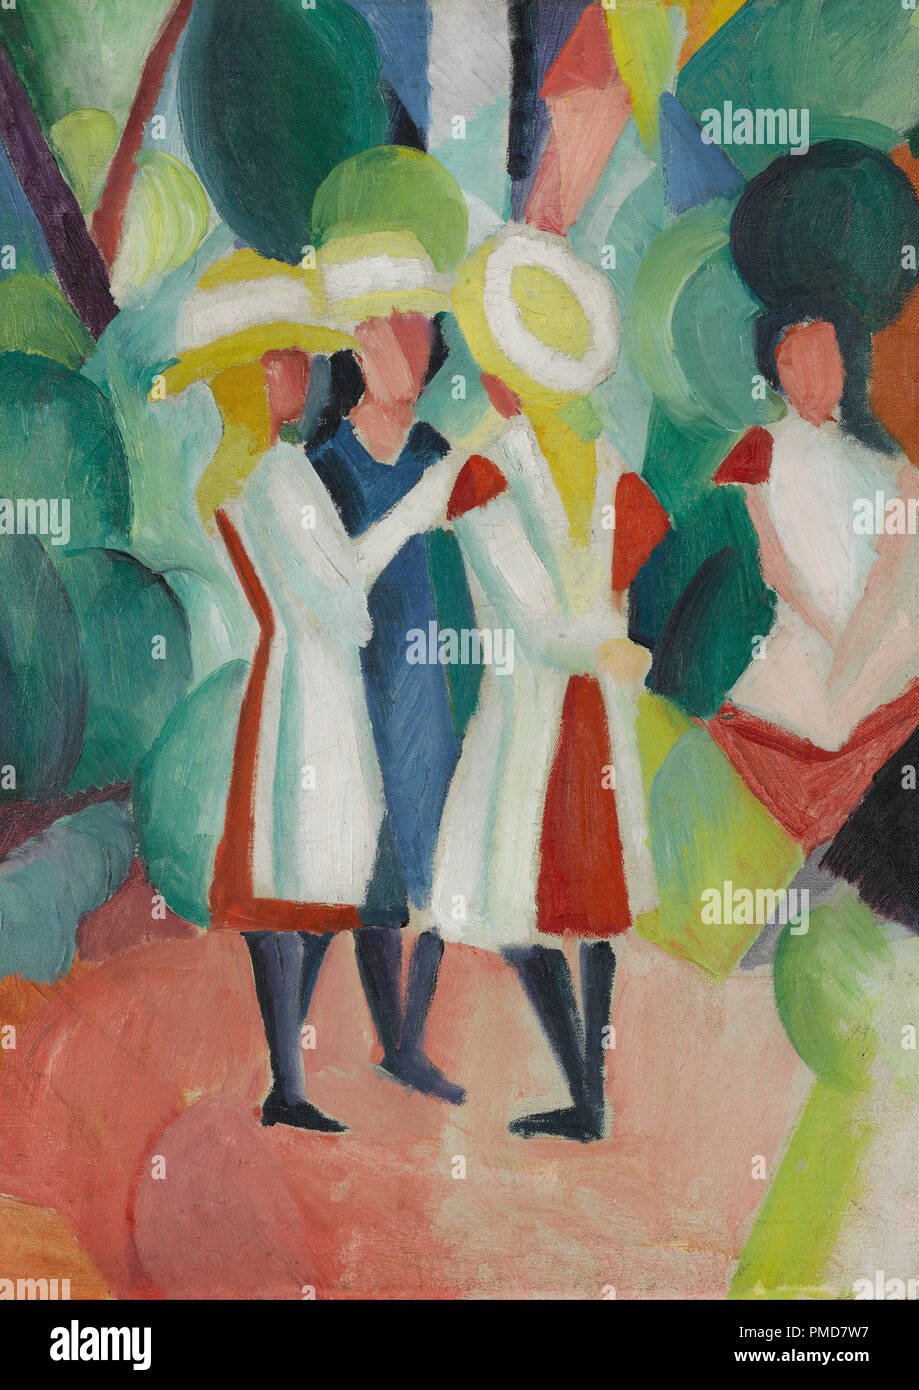 Three girls in yellow straw hats I. Date/Period: 1913. Painting. Oil on canvas. Height: 1,040 mm (40.94 in); Width: 875 mm (34.44 in). Author: August Macke. MACKE, AUGUST. Stock Photo